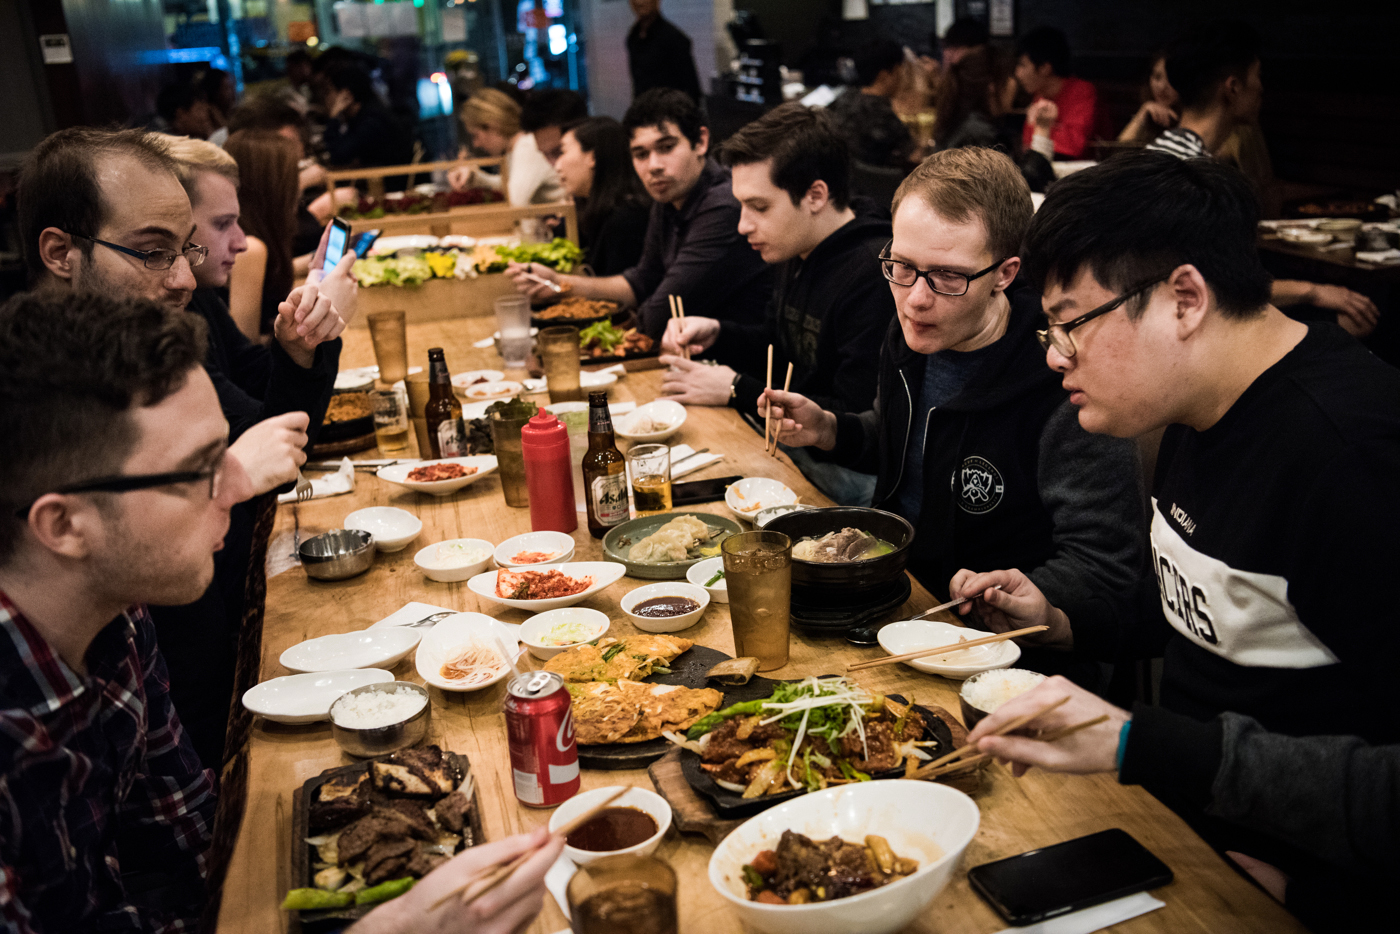  H2k-Gaming team members and staff eat dinner together at their post-match team meal at a Korean barbecue restaurant in New York, NY. This would be one of the last times the team would be together. 